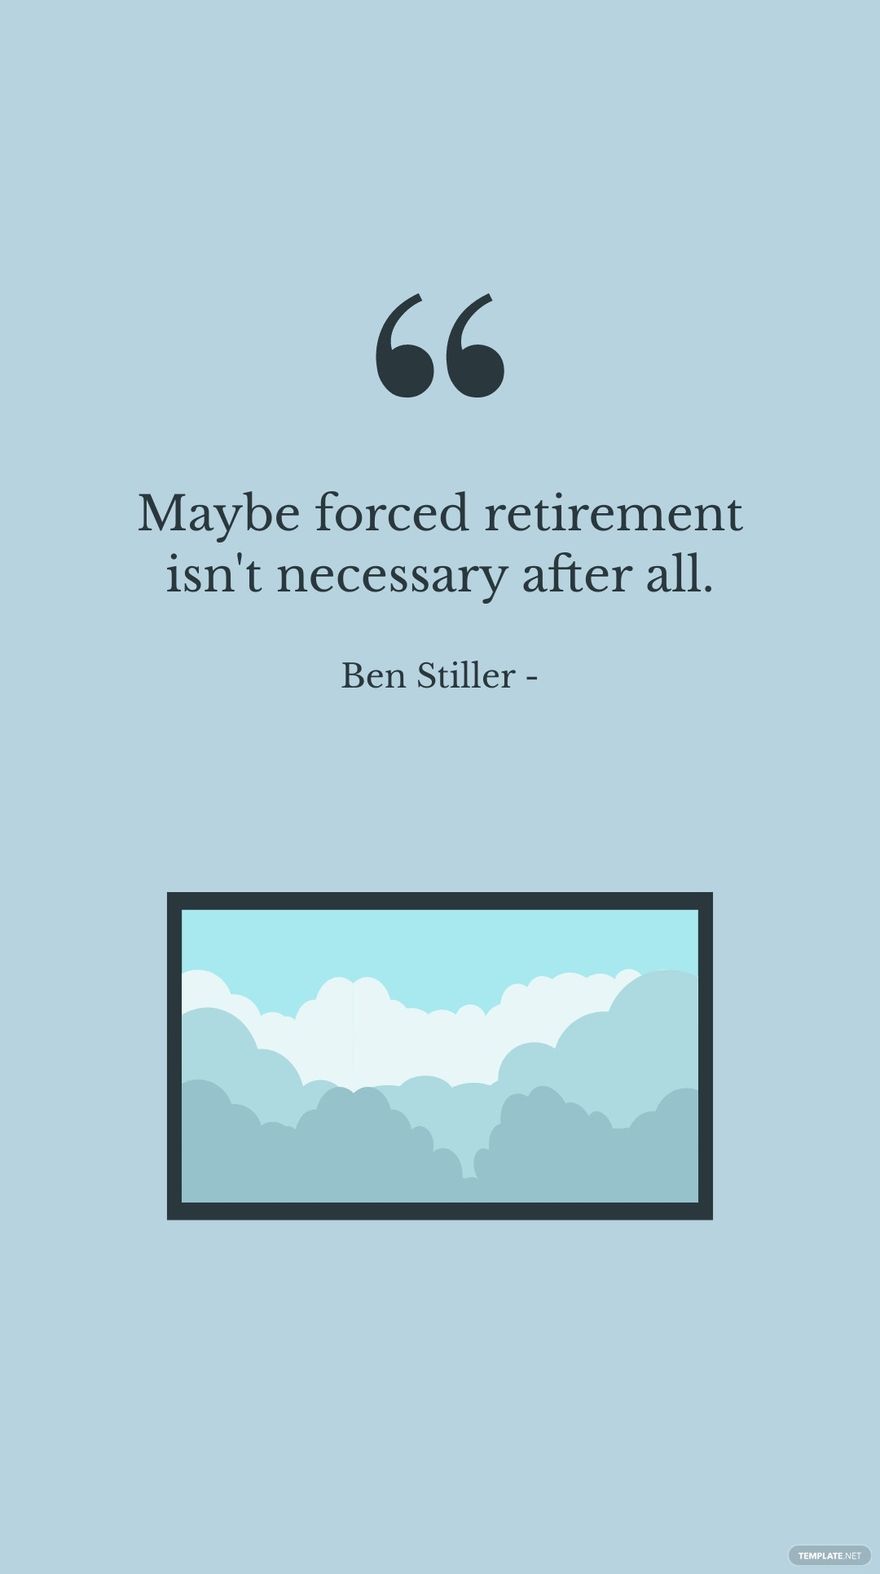 Ben Stiller - Maybe forced retirement isn't necessary after all. in JPG